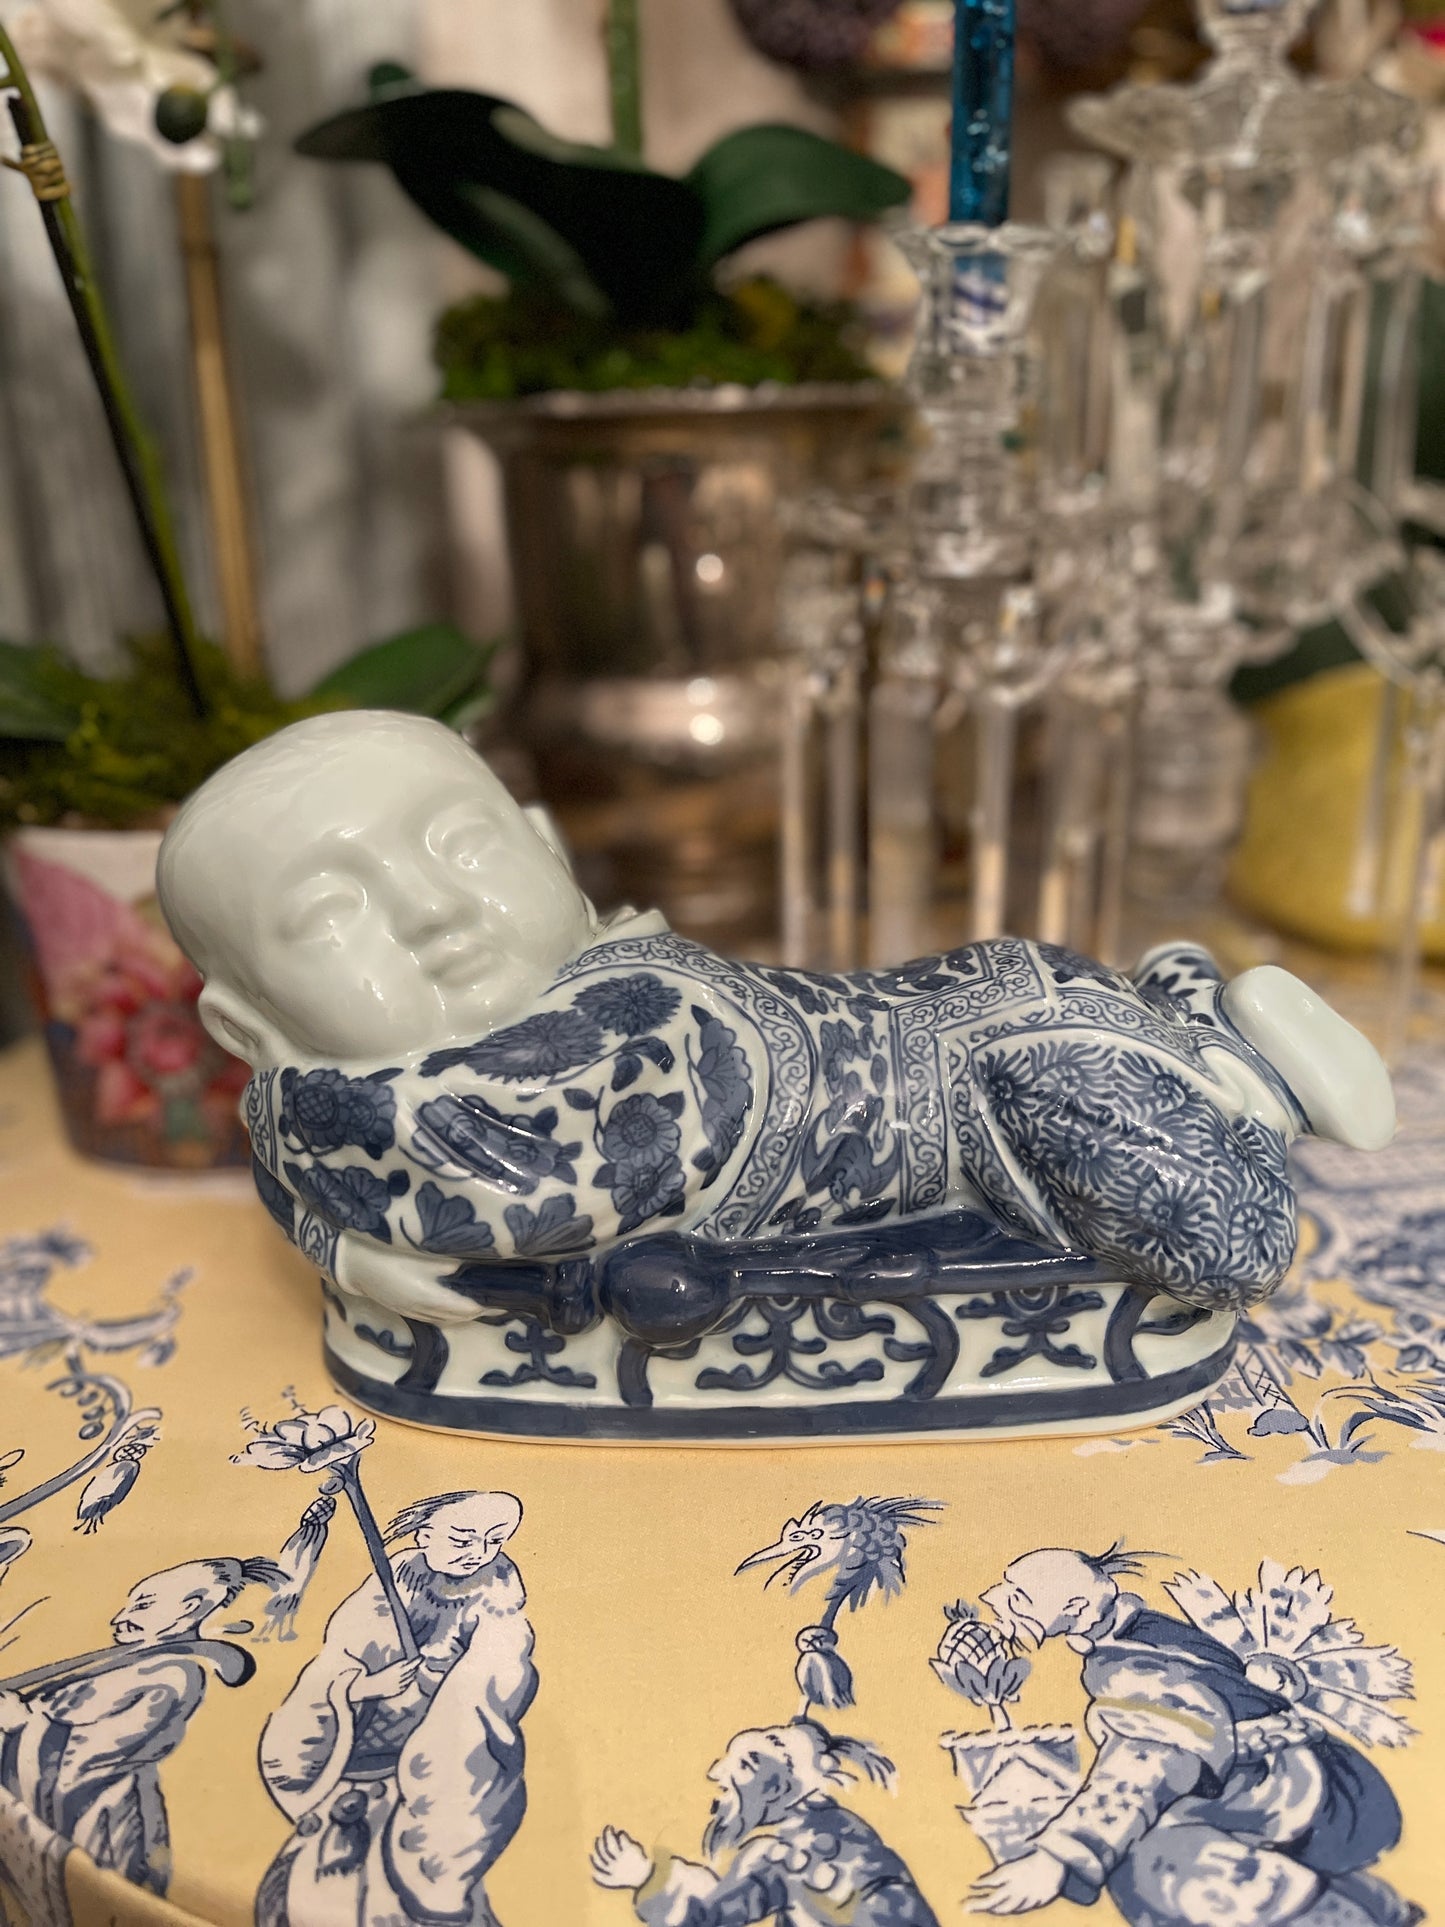 Blue and White Chinoiserie Pillow Baby, Vintage - Figural Pillow - Hand-painted -Porcelain Chinese Sleeping Baby